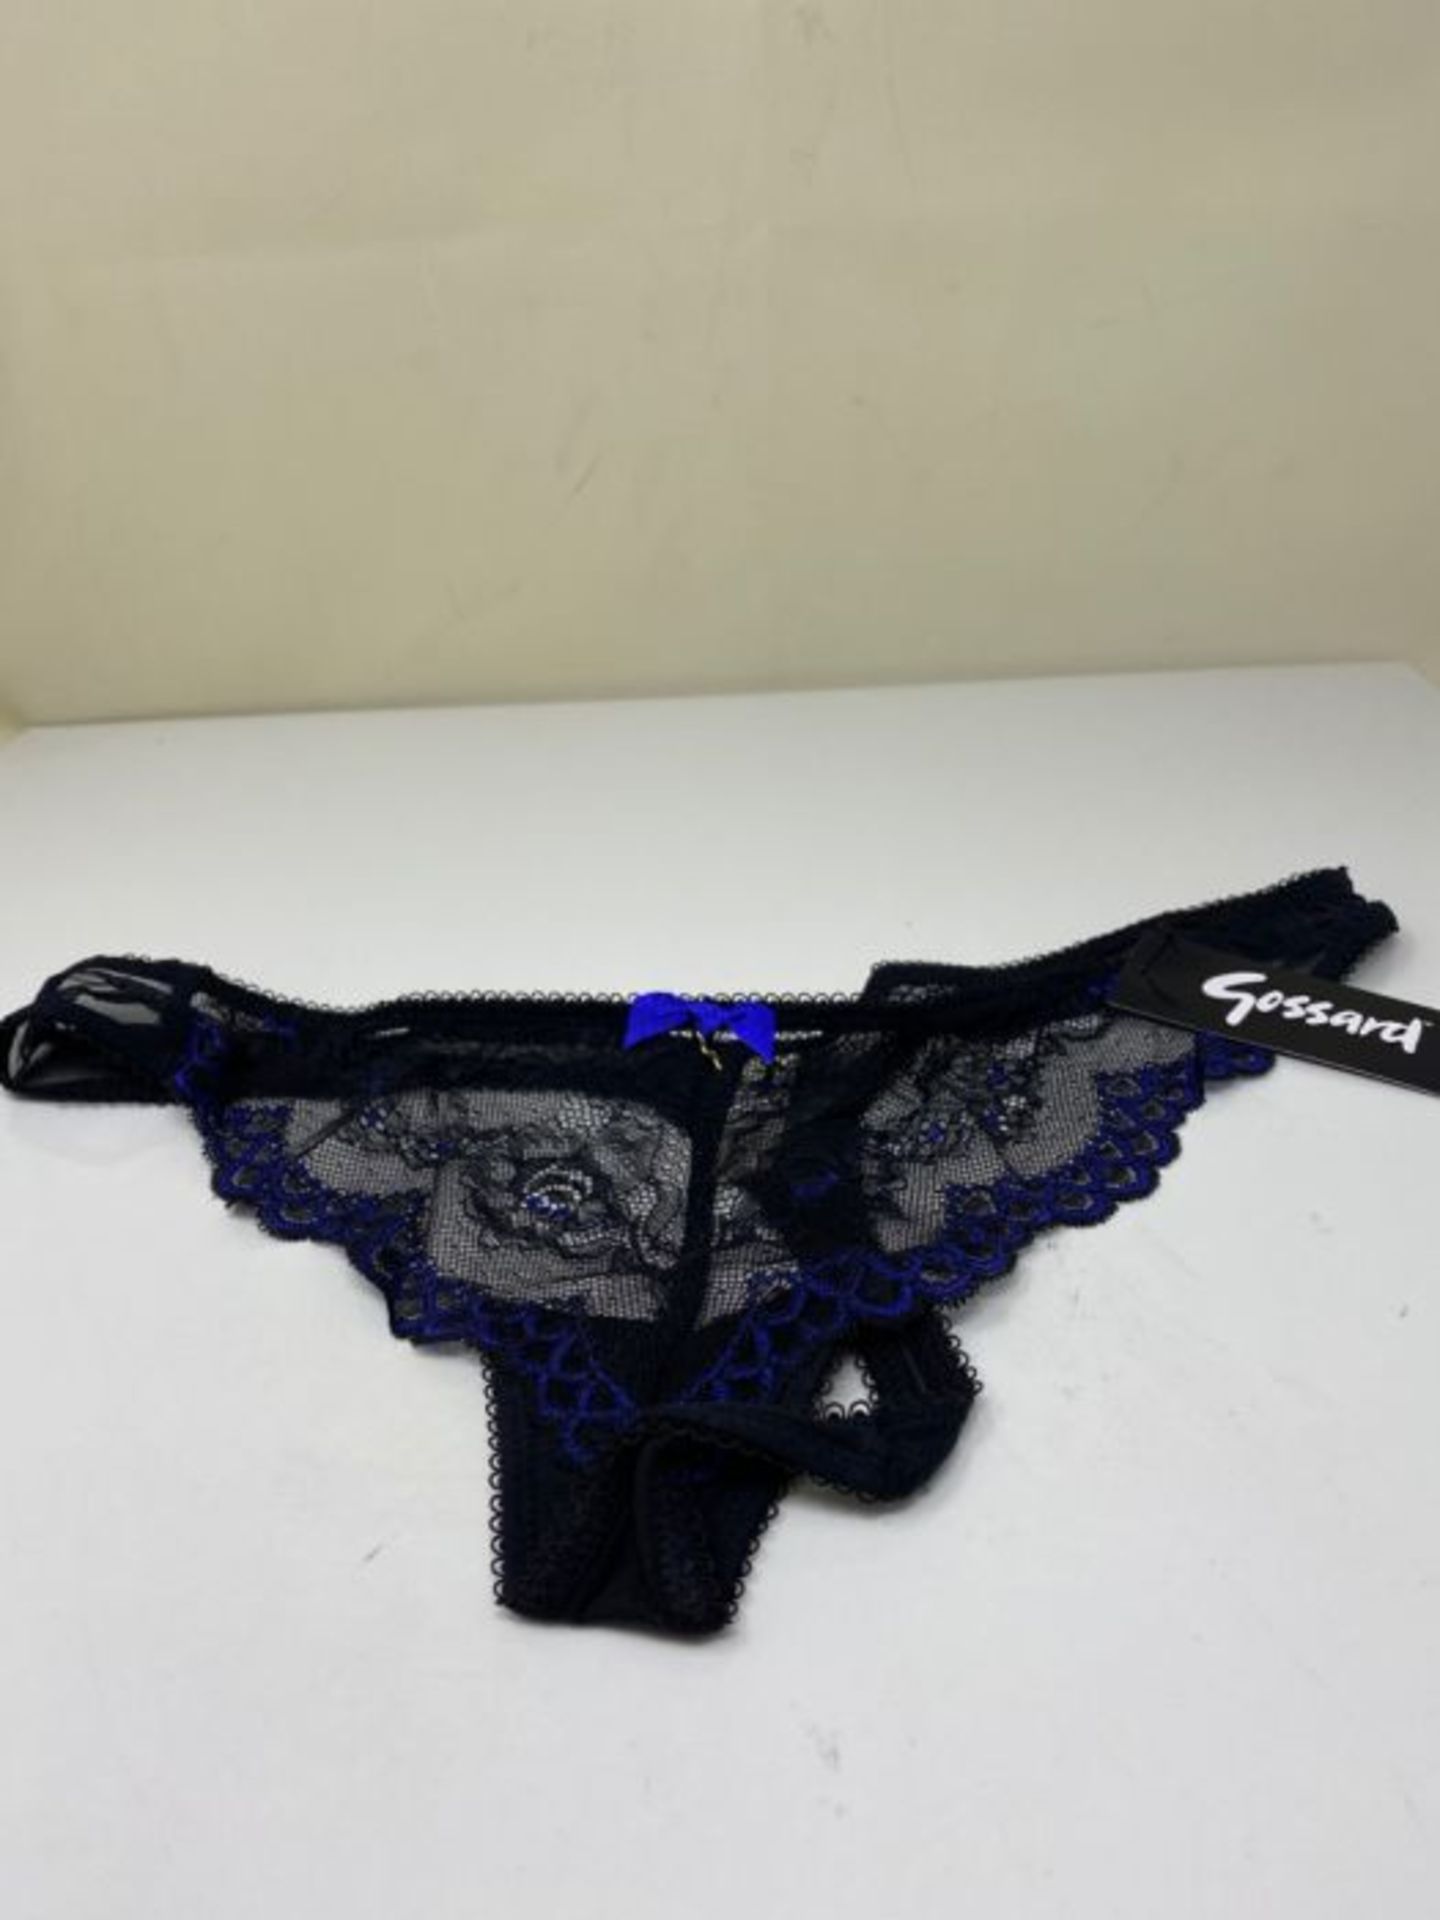 Gossard Women's Superboost Lace Thong Panties, Black/Electric Blue, Extra Small - Image 2 of 2